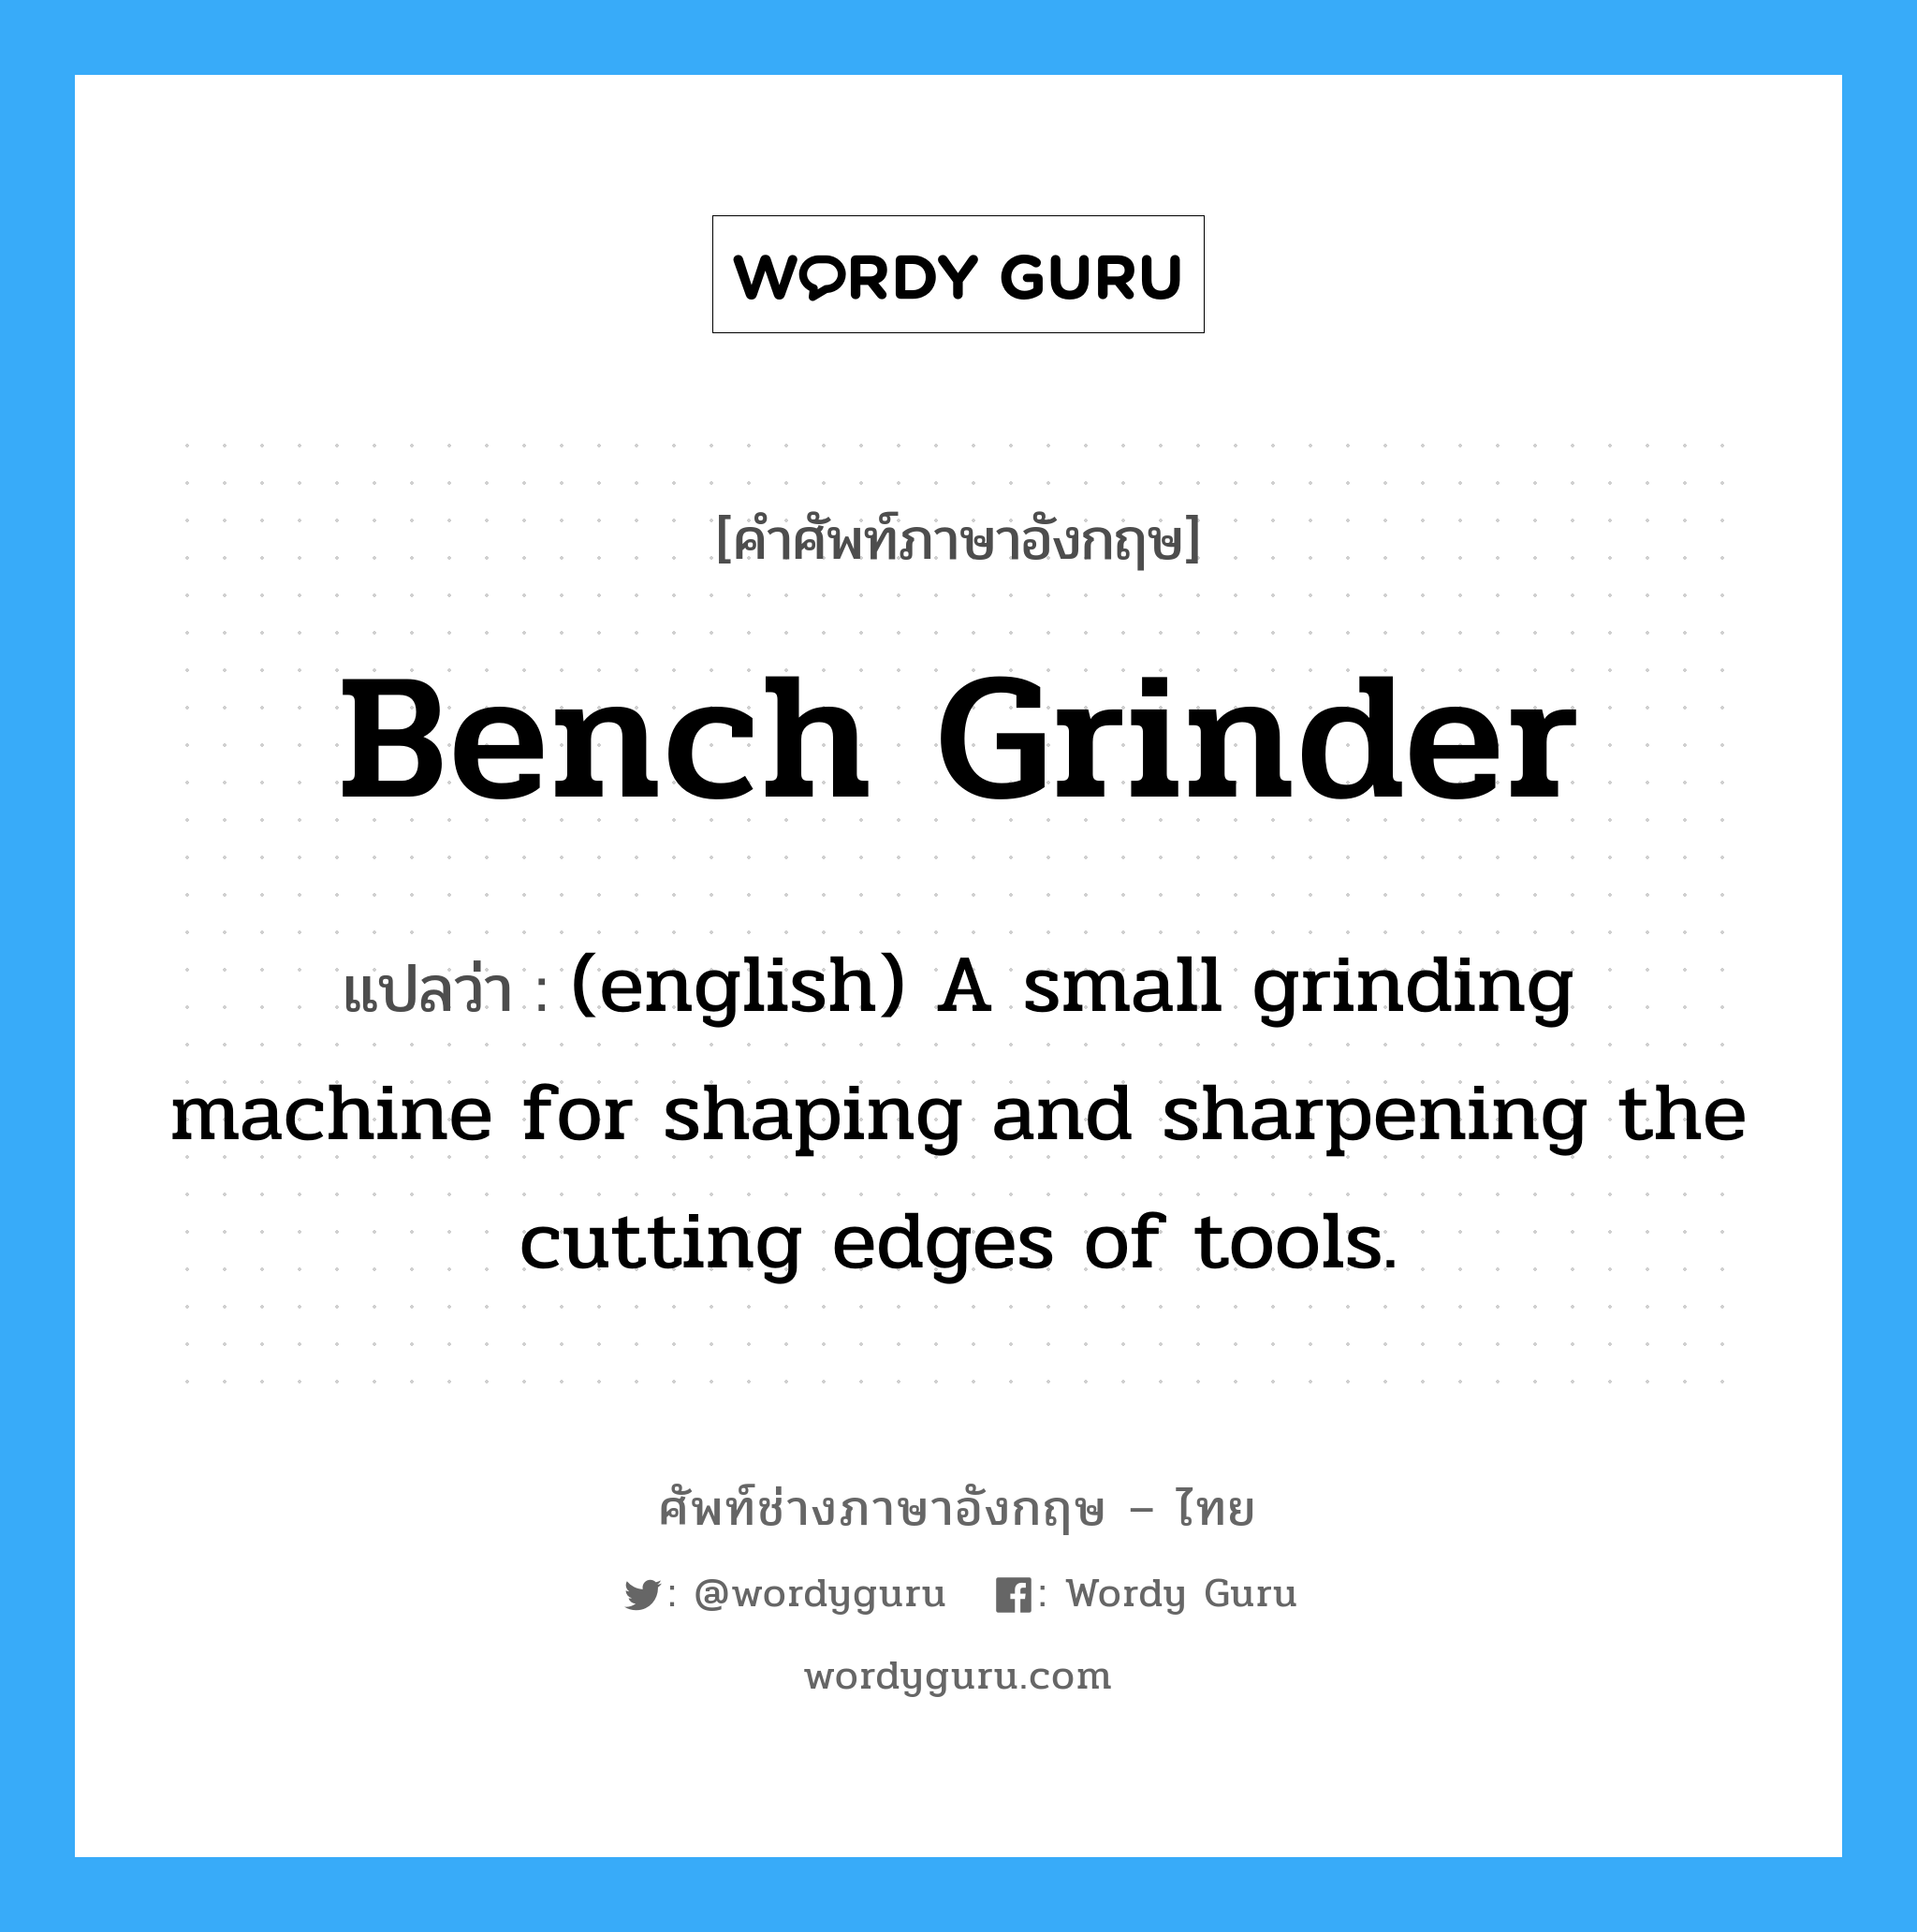 Bench Grinder แปลว่า?, คำศัพท์ช่างภาษาอังกฤษ - ไทย Bench Grinder คำศัพท์ภาษาอังกฤษ Bench Grinder แปลว่า (english) A small grinding machine for shaping and sharpening the cutting edges of tools.